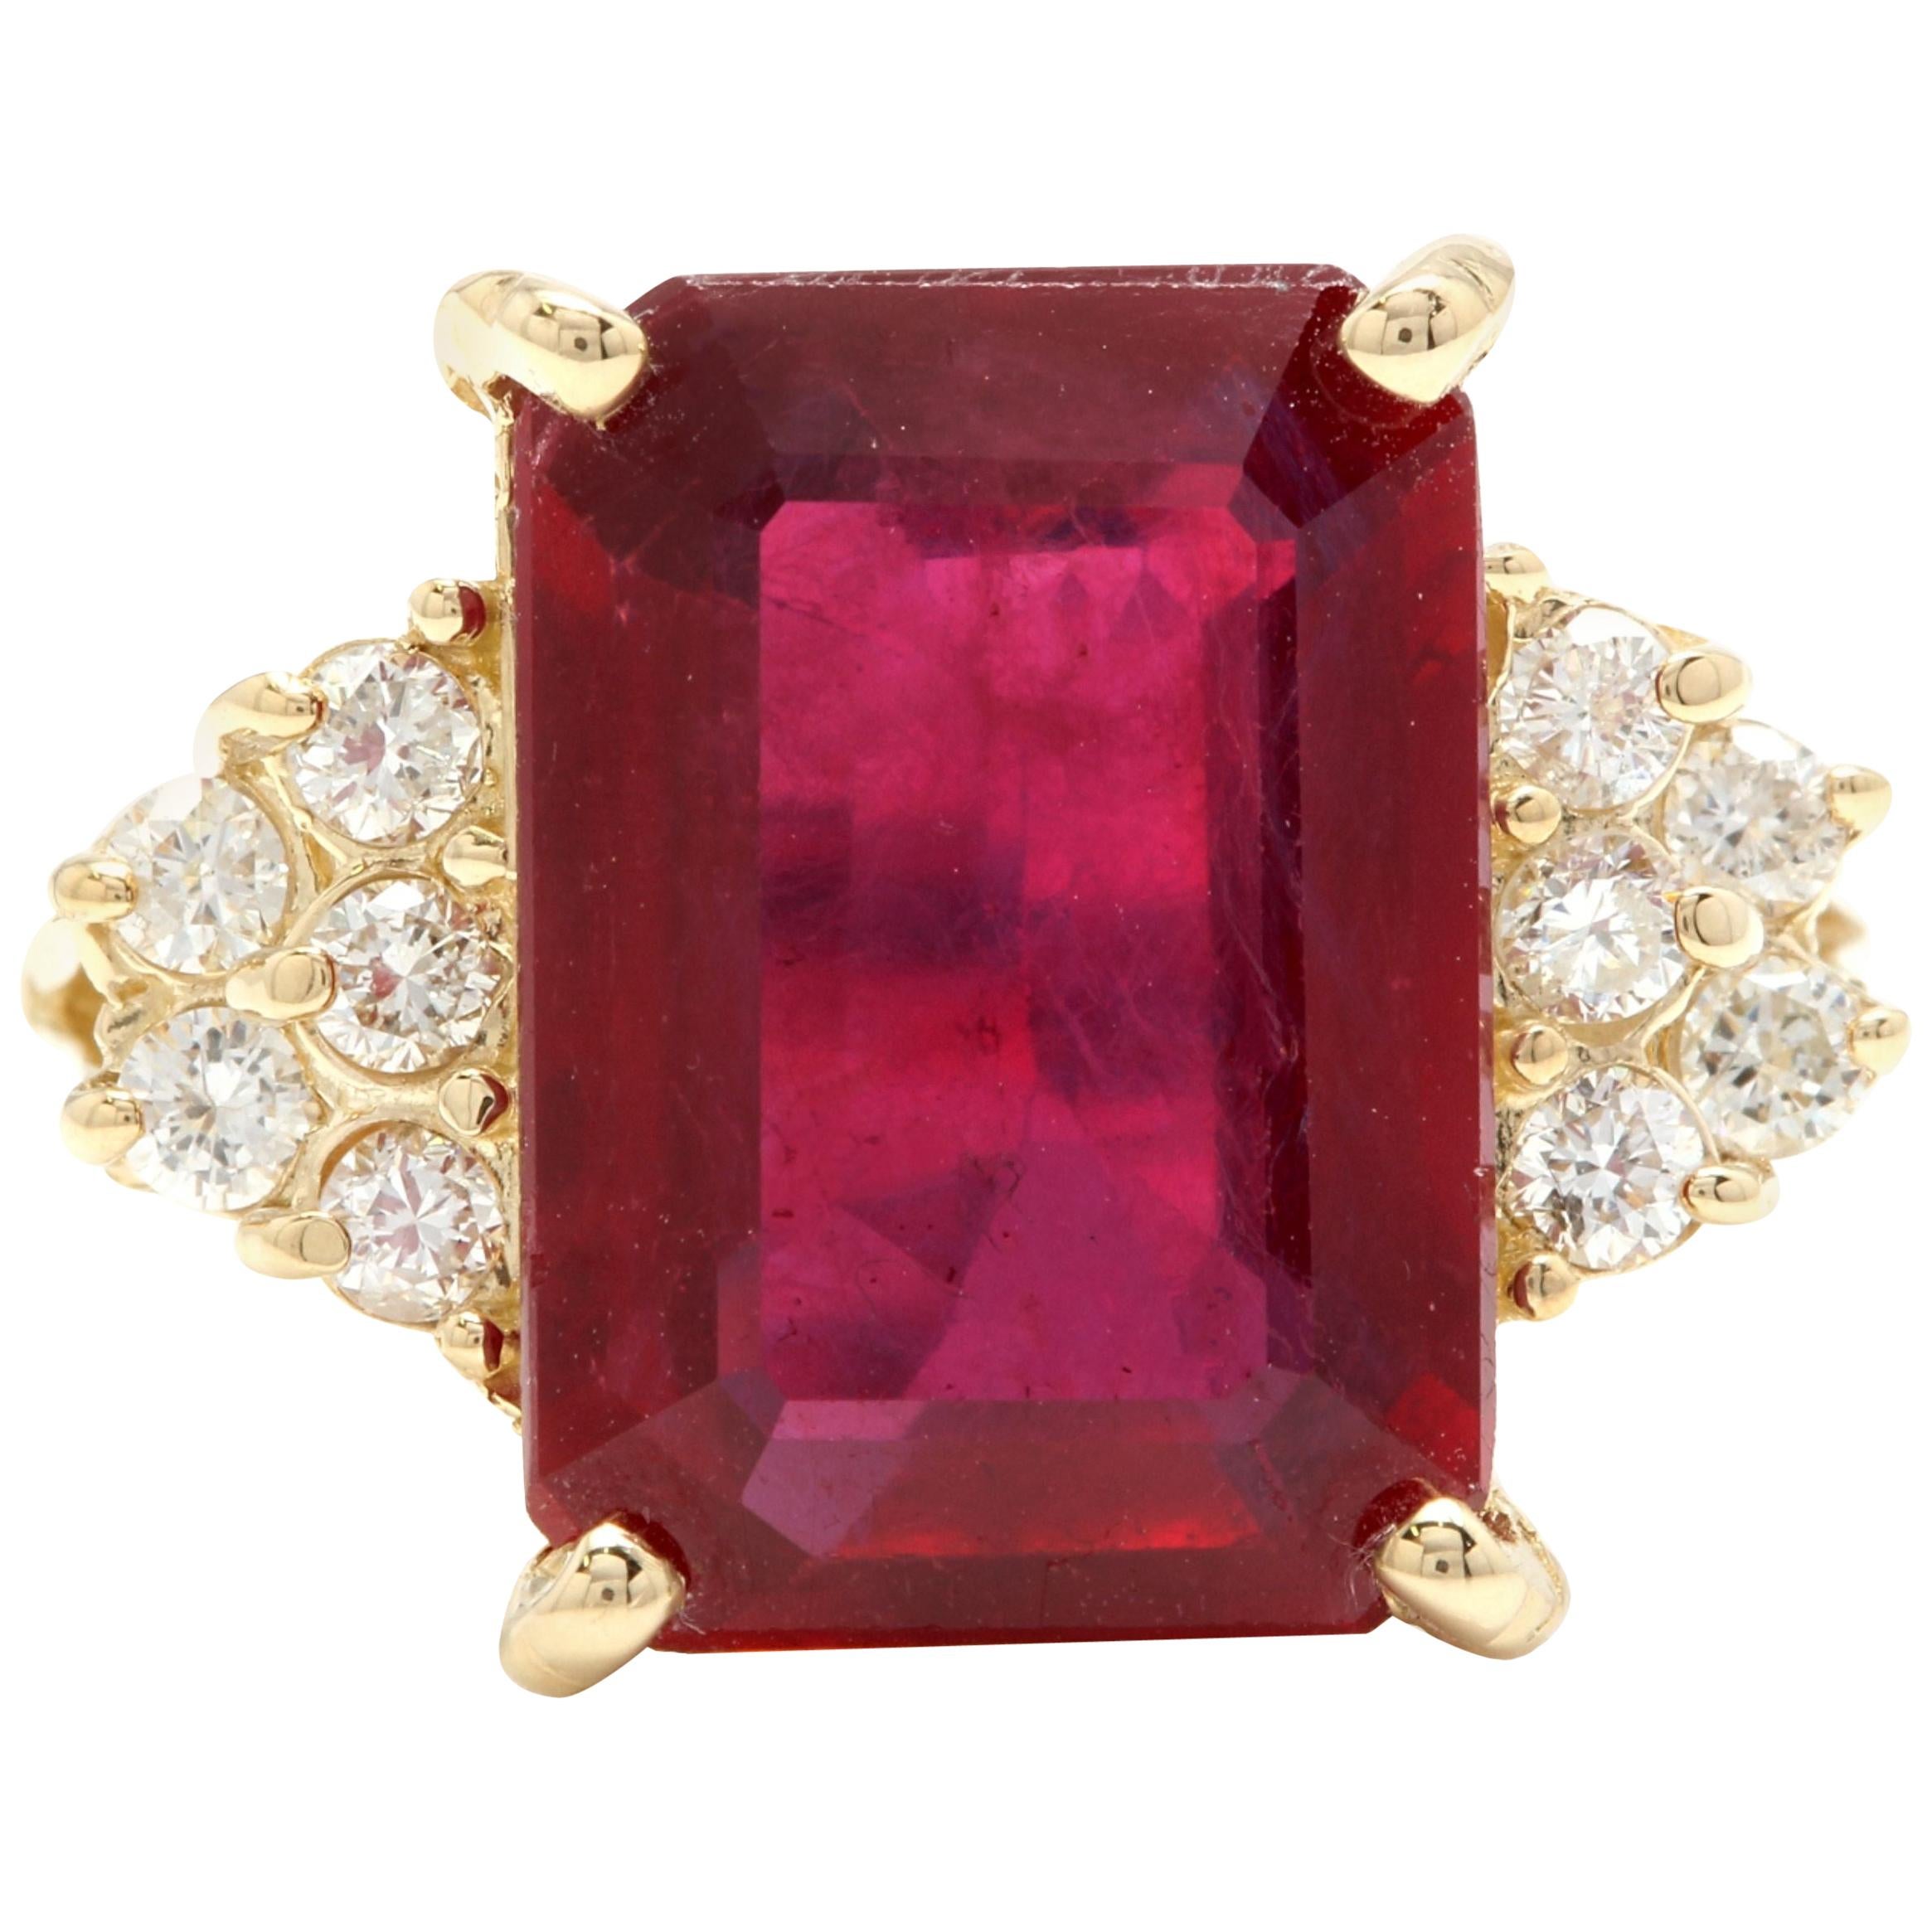 12.60 Carat Natural Red Ruby and Diamond 14 Karat Solid Yellow Gold Ring